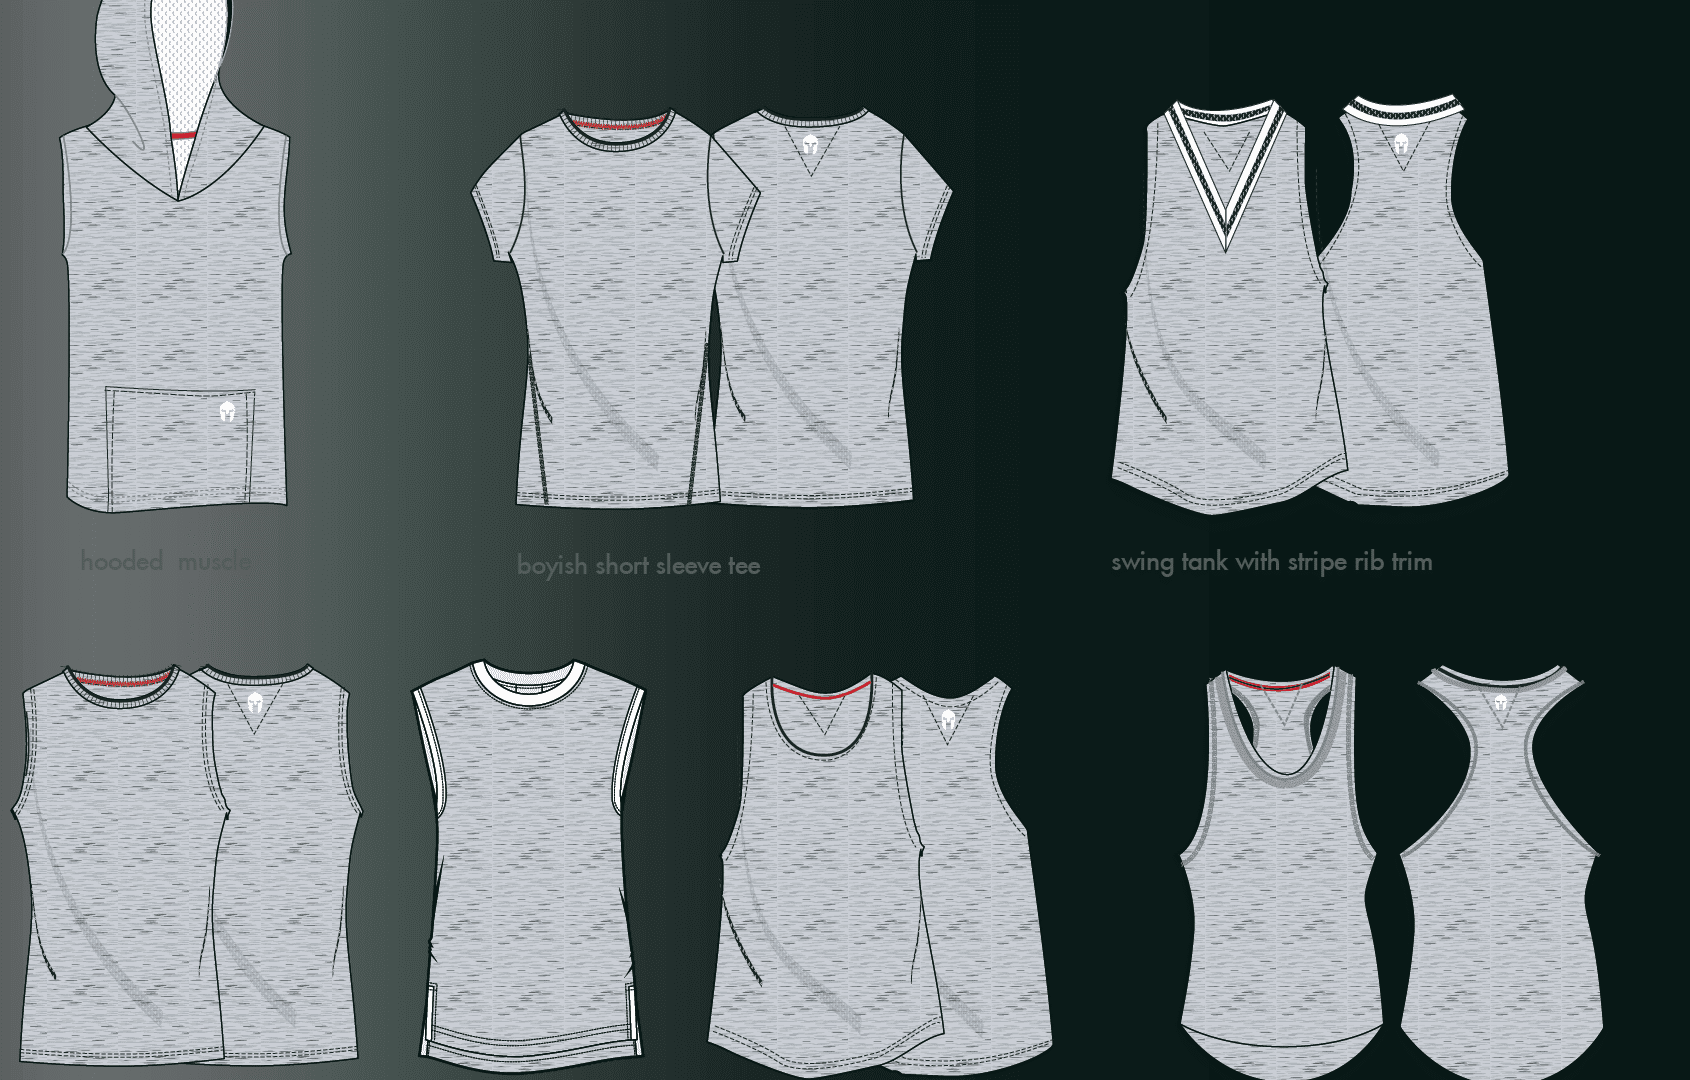 A series of images showing how to wear different types of clothing.